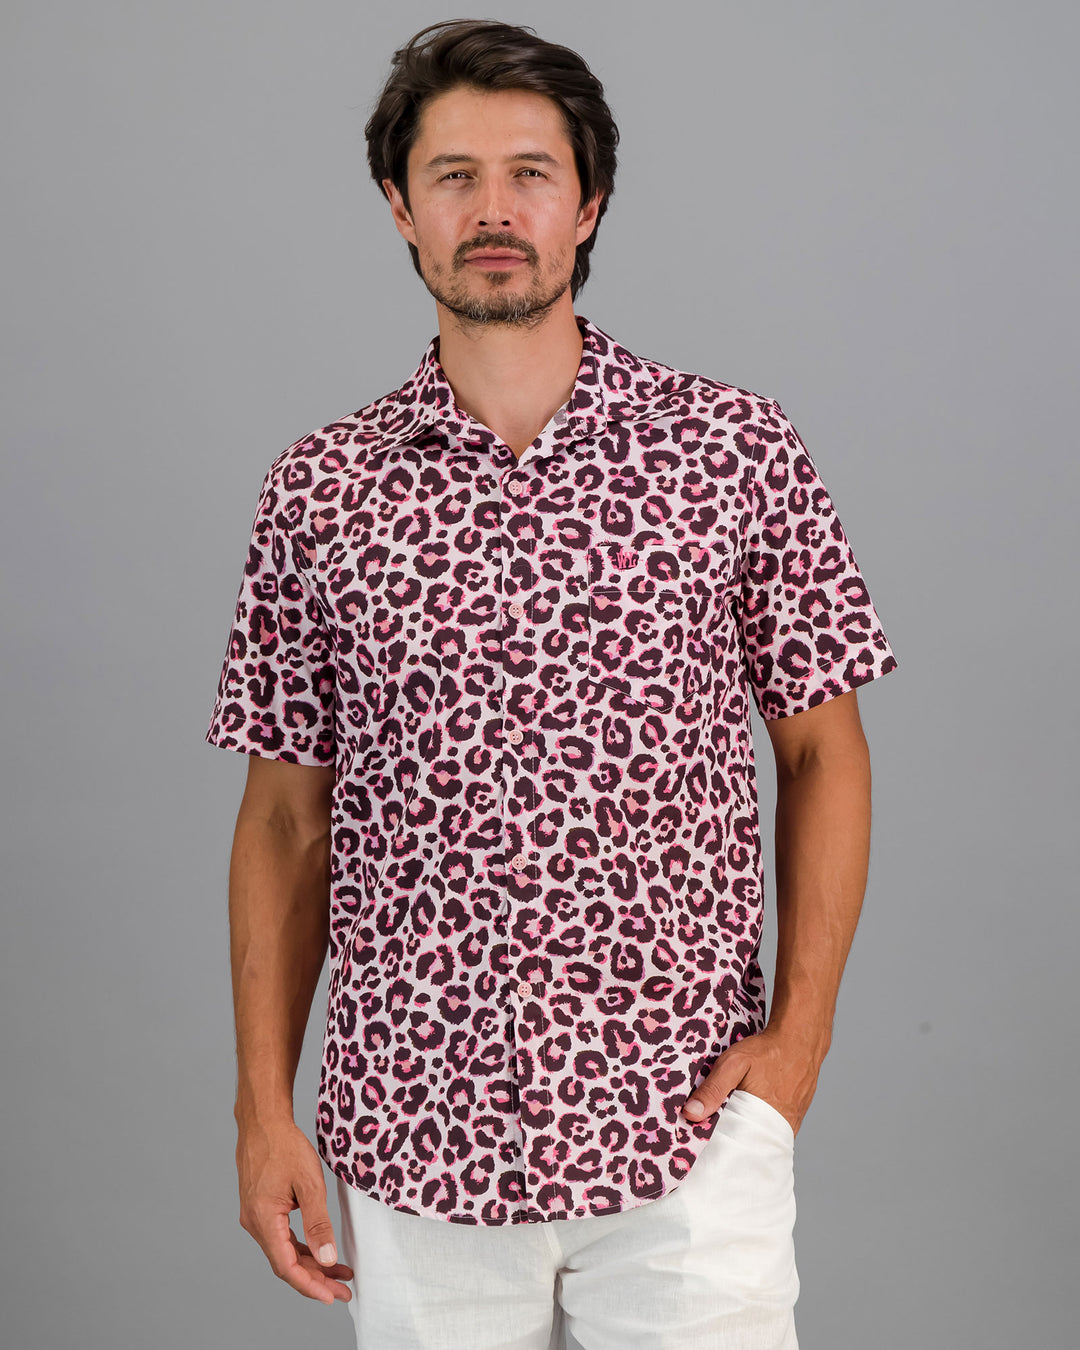 Mens Holiday Shirt Leopard Skin Pink Front - Woodstock Laundry